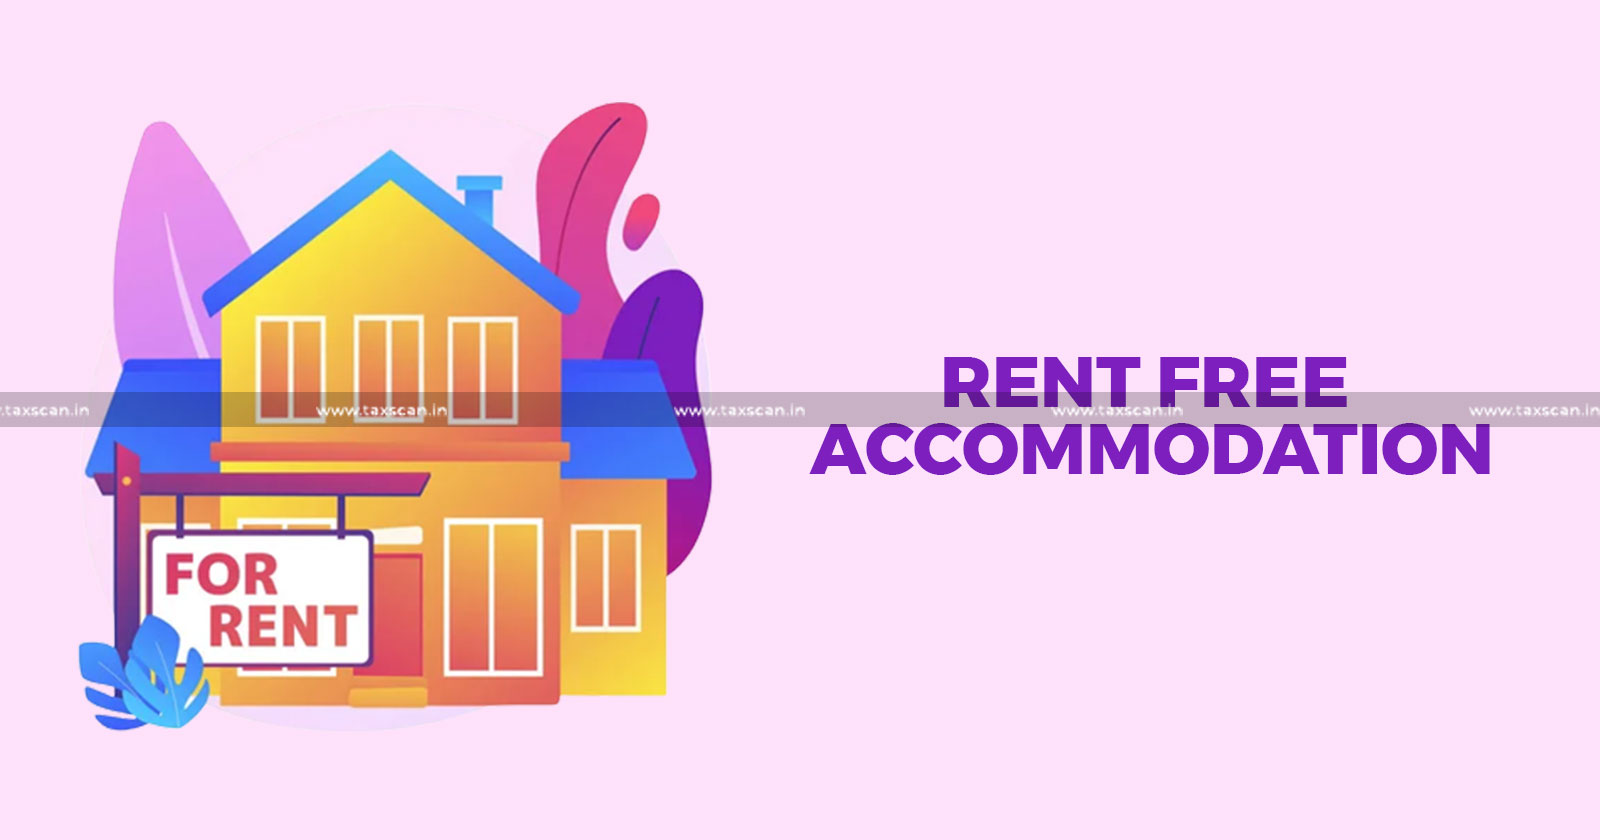 Rent-free Accommodation - CISF personnel - Additional Consideration - CESTAT - Service Tax Demand - TAXSCAN